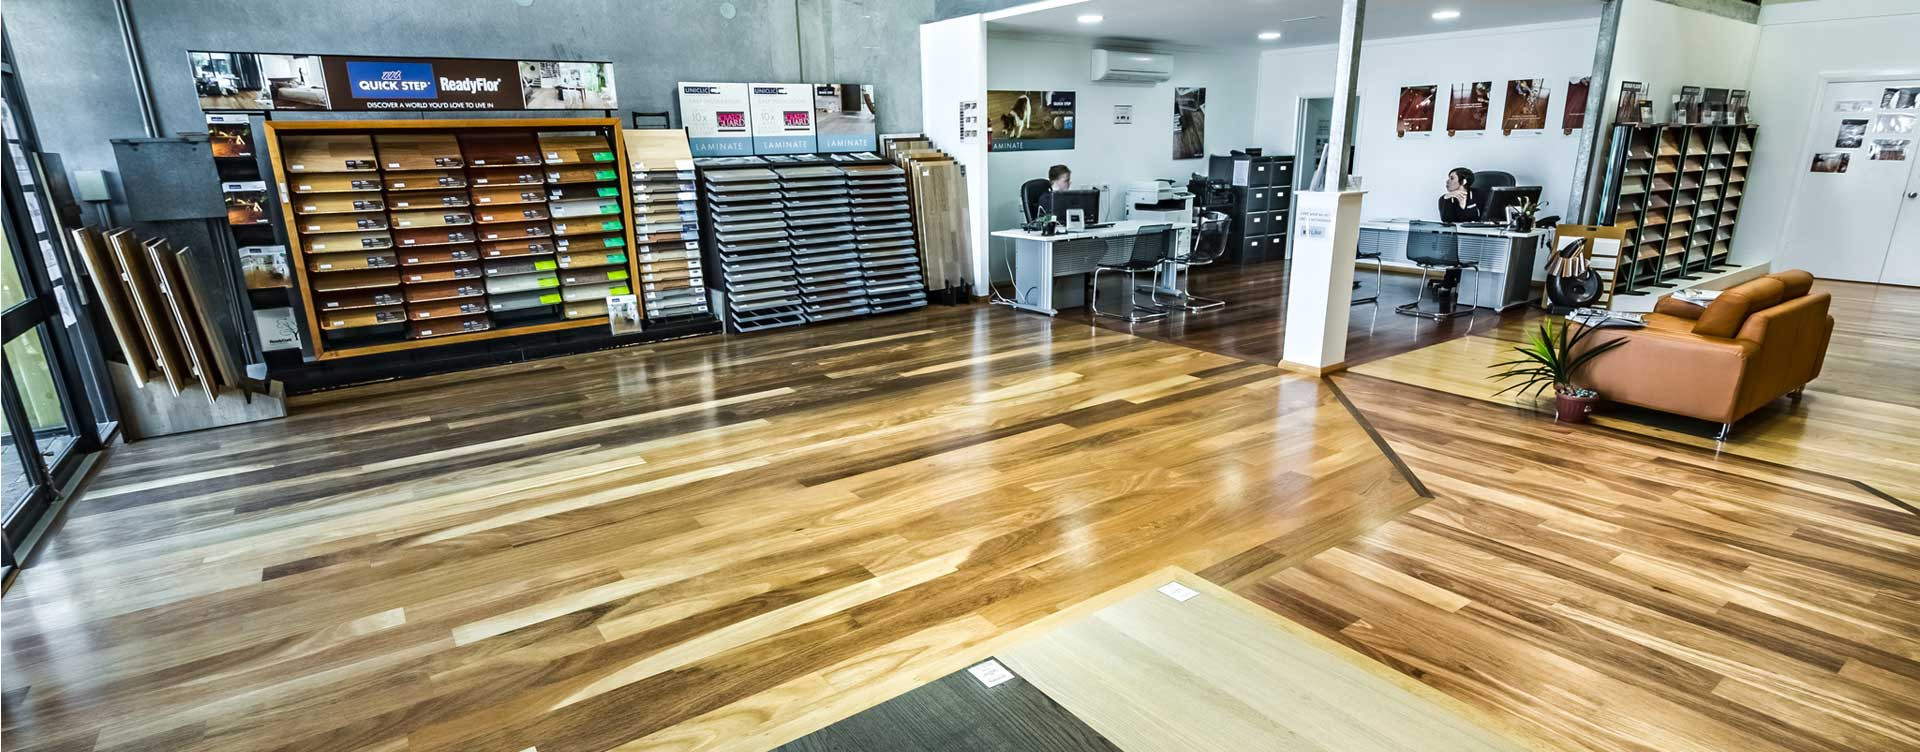 27 Stylish Bamboo Flooring Vs Hardwood Laminate 2024 free download bamboo flooring vs hardwood laminate of timber flooring perth coastal flooring wa quality wooden throughout thats why they call us the home of fine wood floors